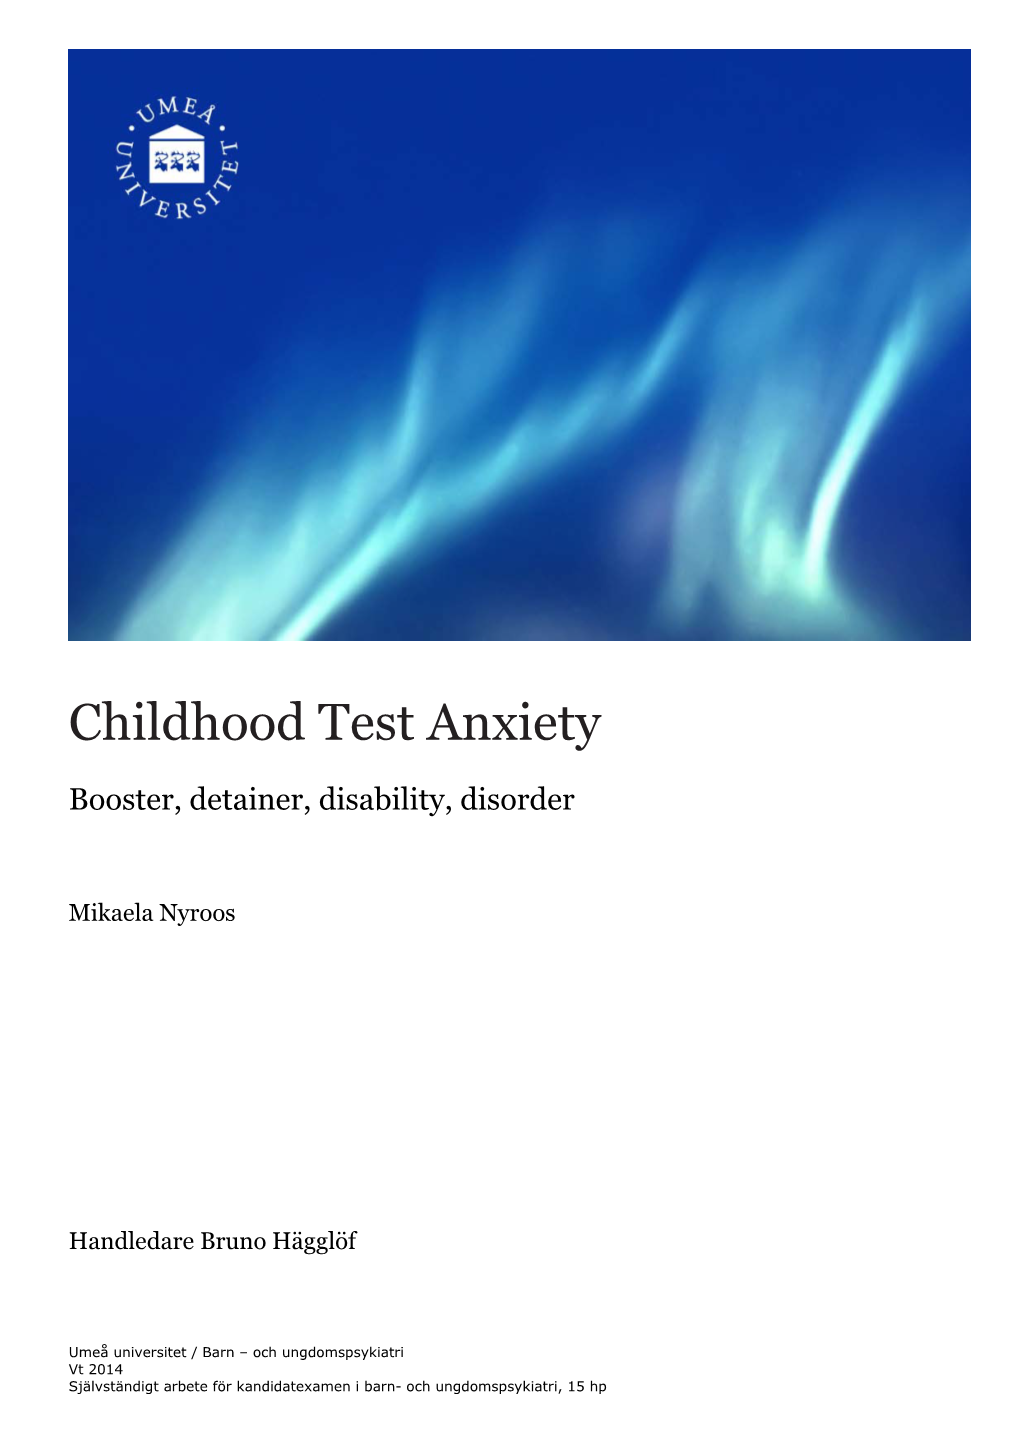 Childhood Test Anxiety